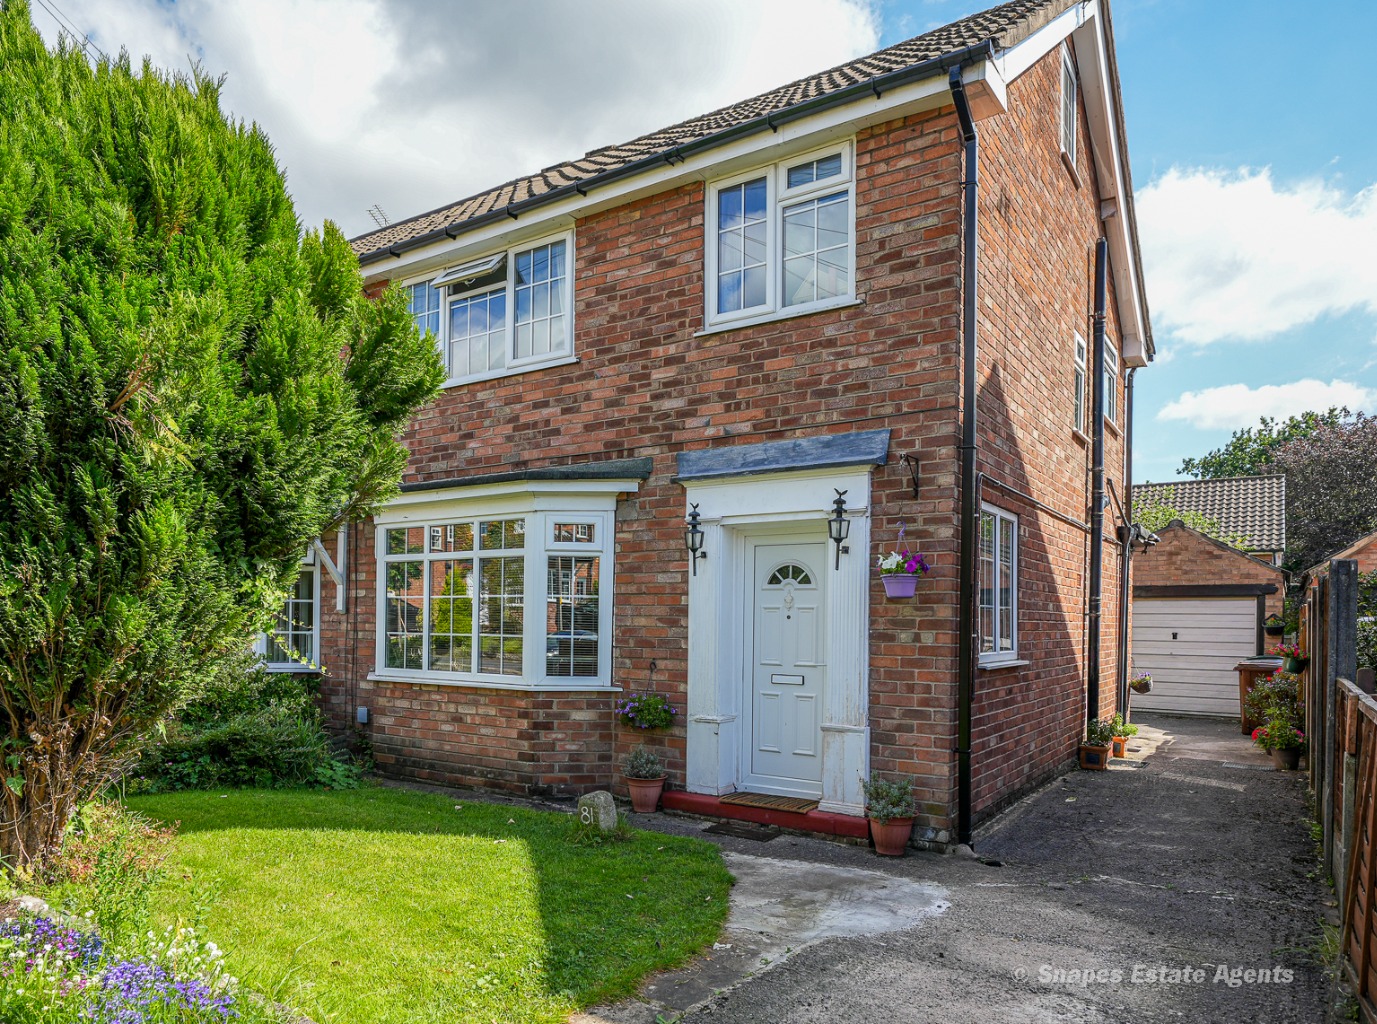 Images for Ashley Drive, Bramhall SK7 1EP